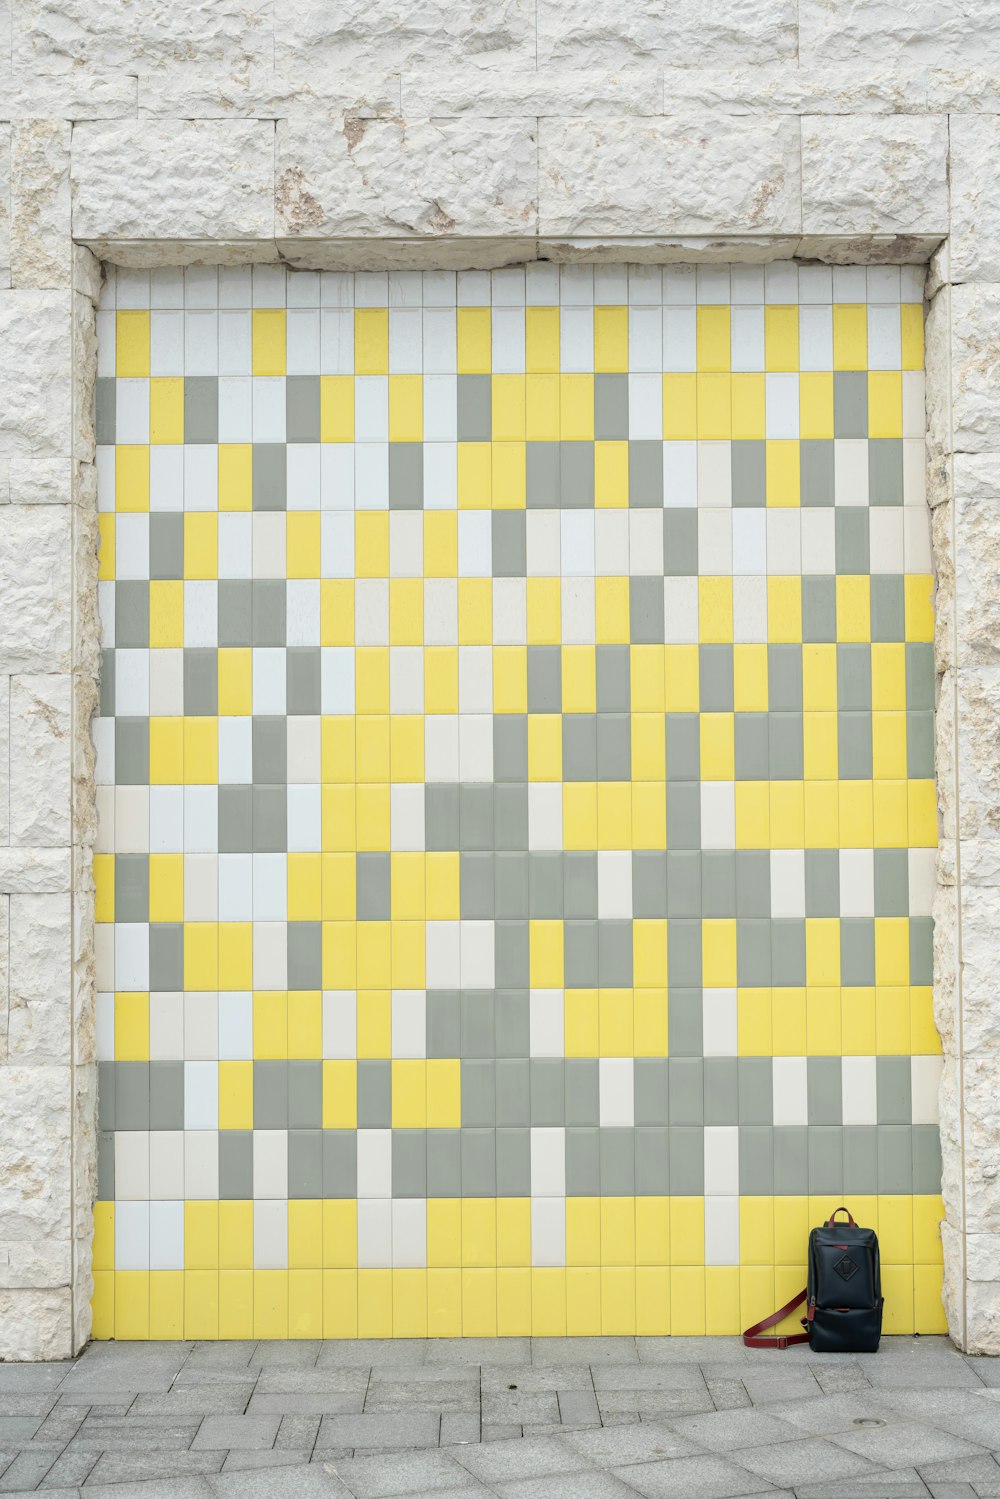 black backpack in yellow, white and grey wall